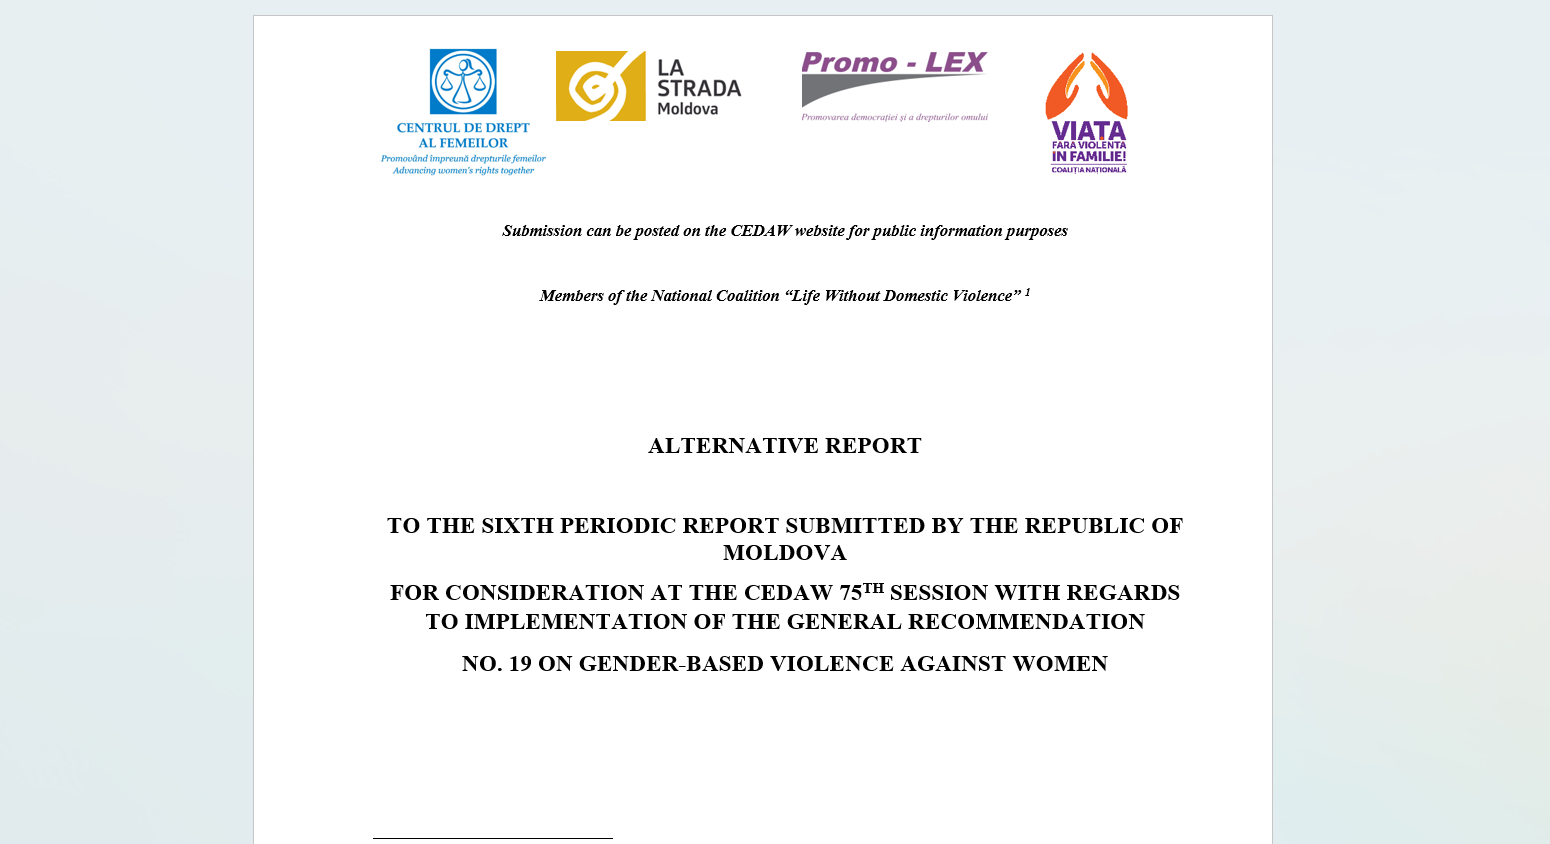 Alternative report of civil society for the CEDAW Committee